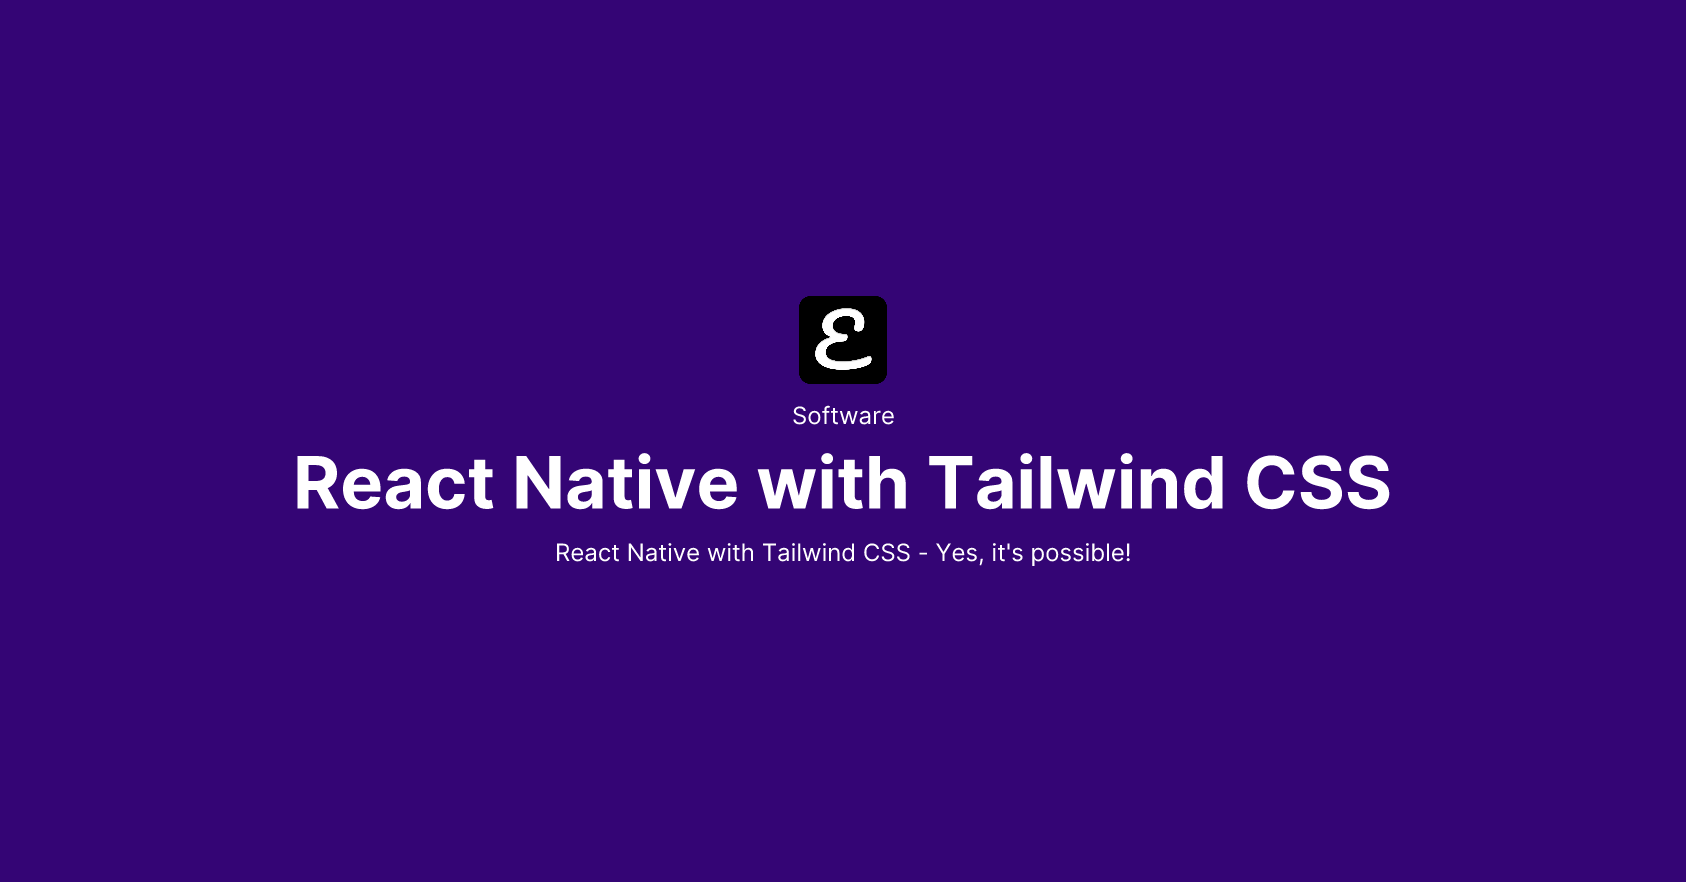 React Native with Tailwind CSS by Eric David Smith